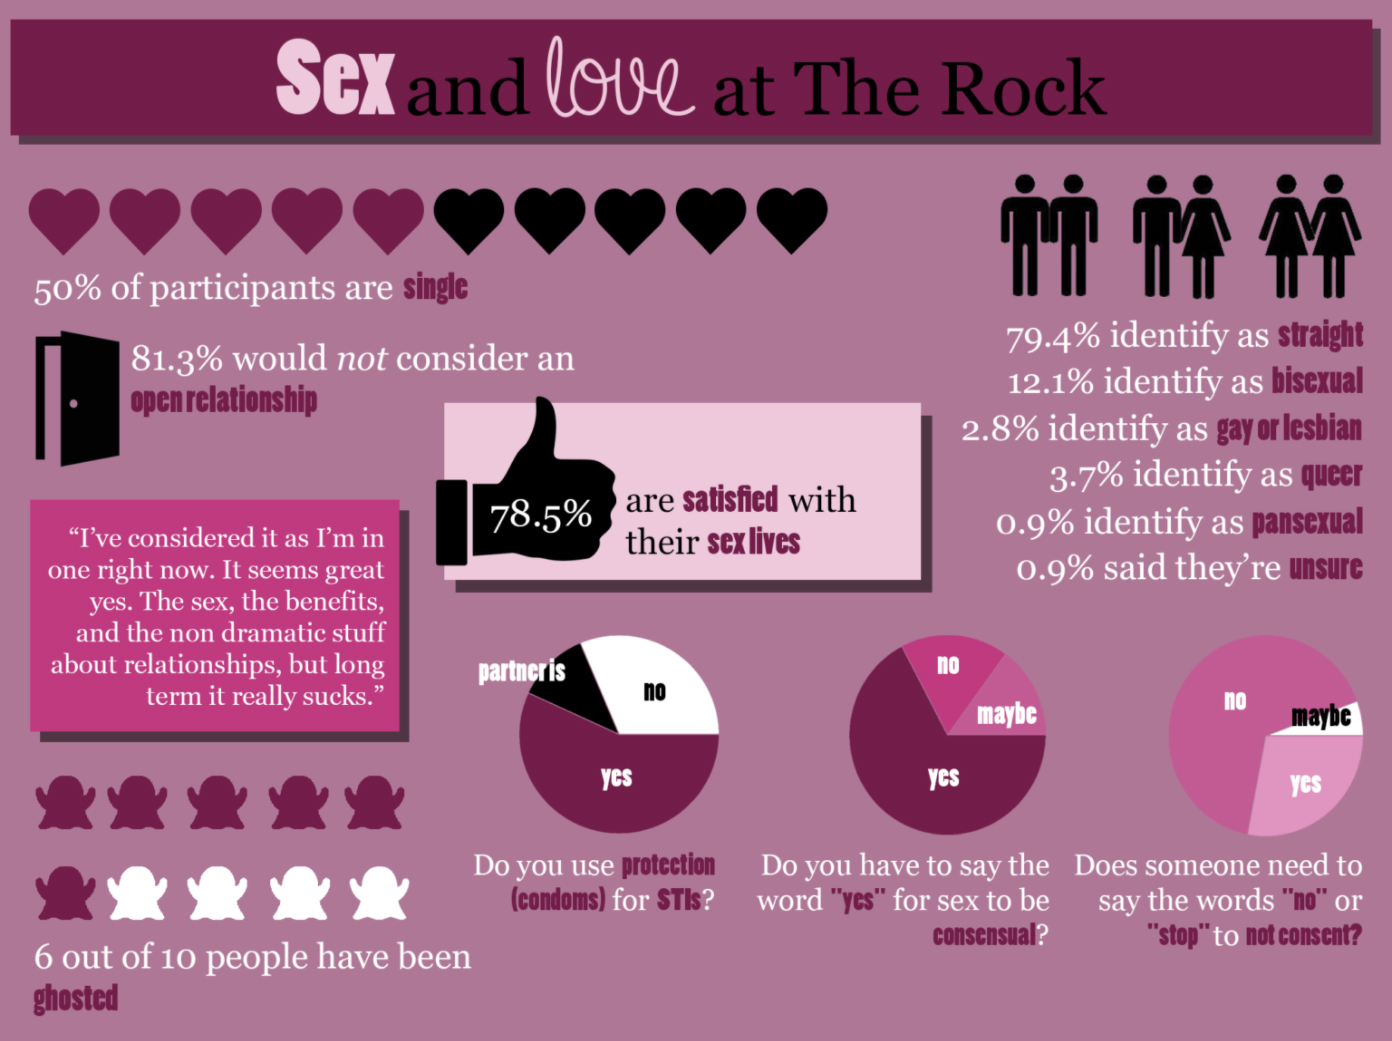 Sex and love survey reveals differing sexual experiences picture